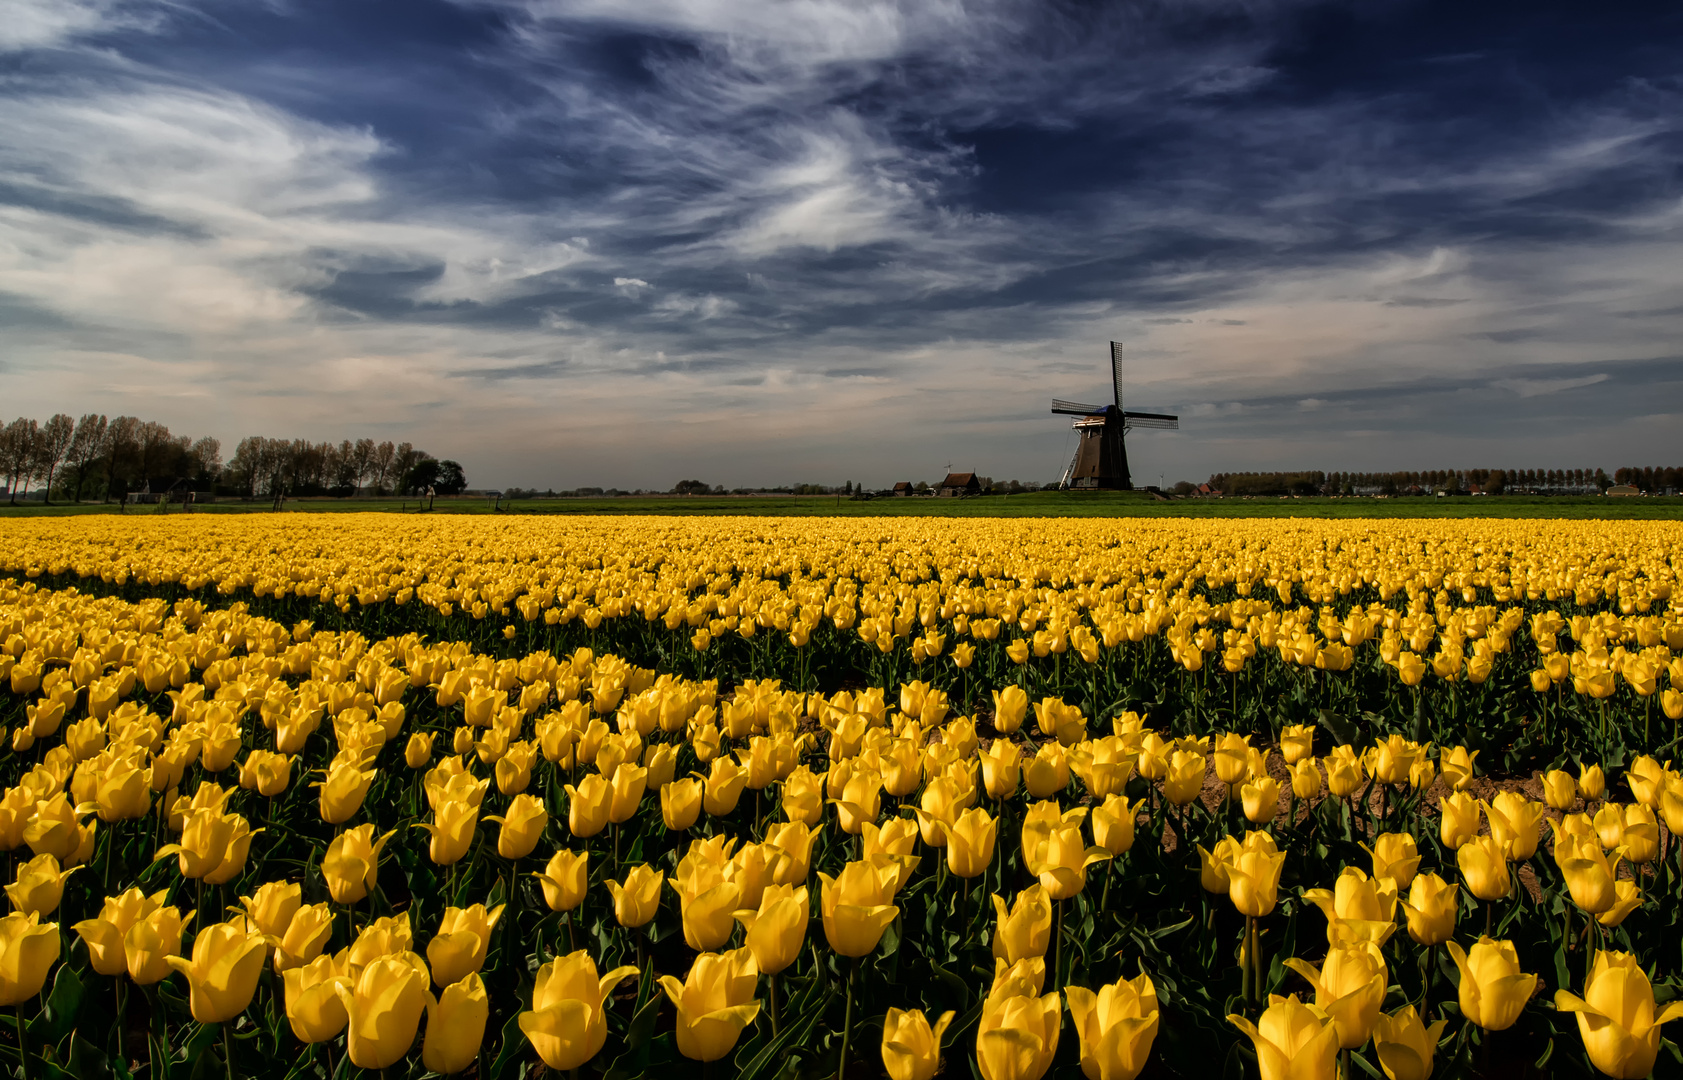 The Tulips And The Mill